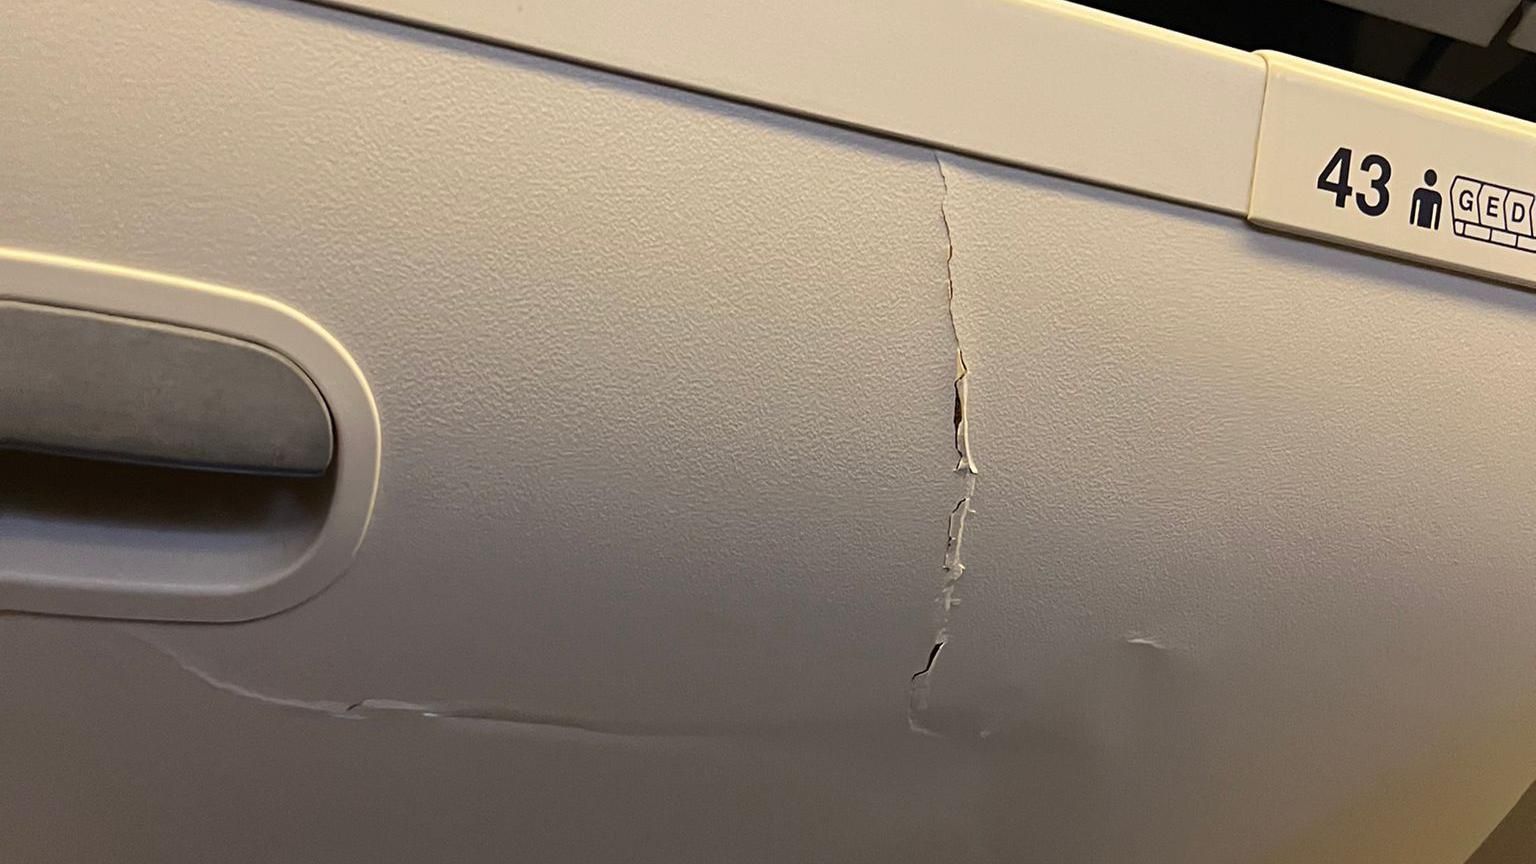 An overhead compartment cracked and visibly damaged